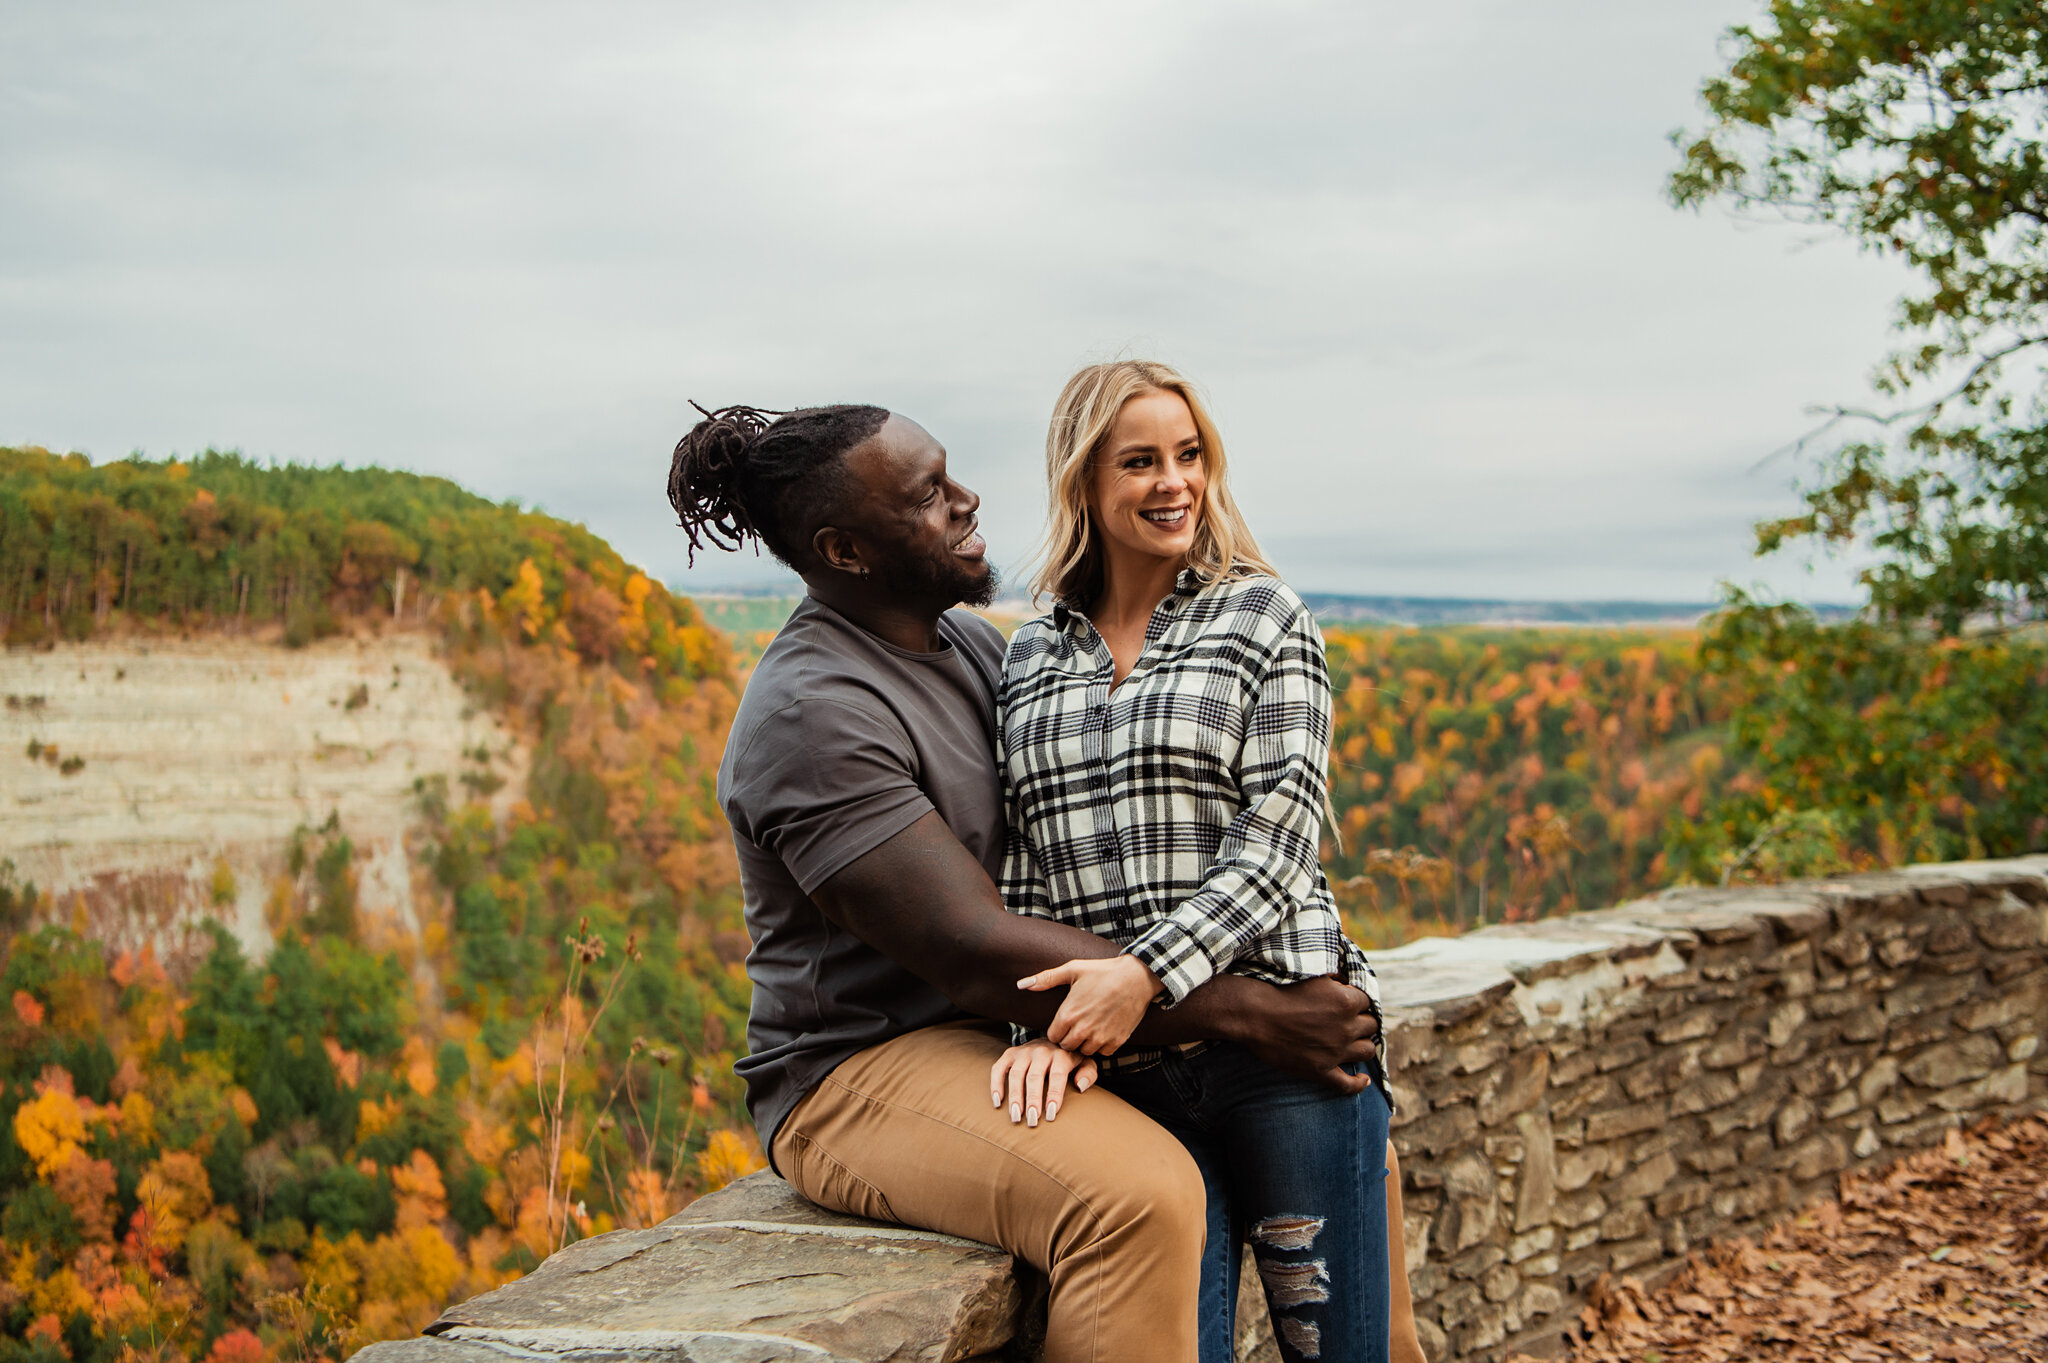 Letchworth_State_Park_Rochester_Couples_Session_JILL_STUDIO_Rochester_NY_Photographer_9557.jpg